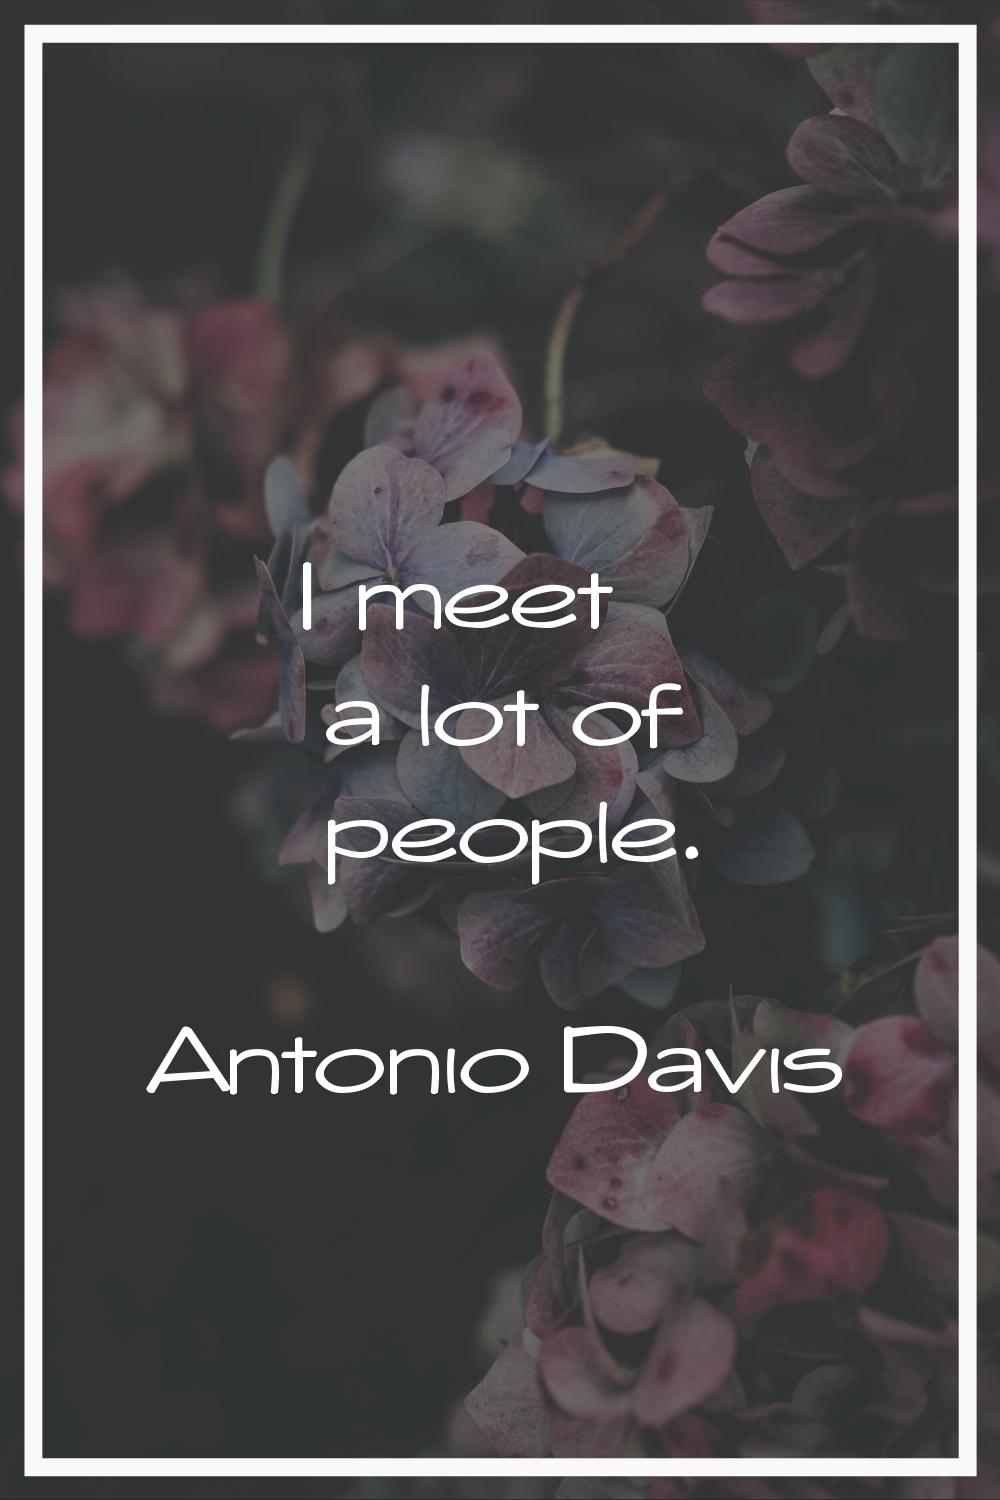 I meet a lot of people.